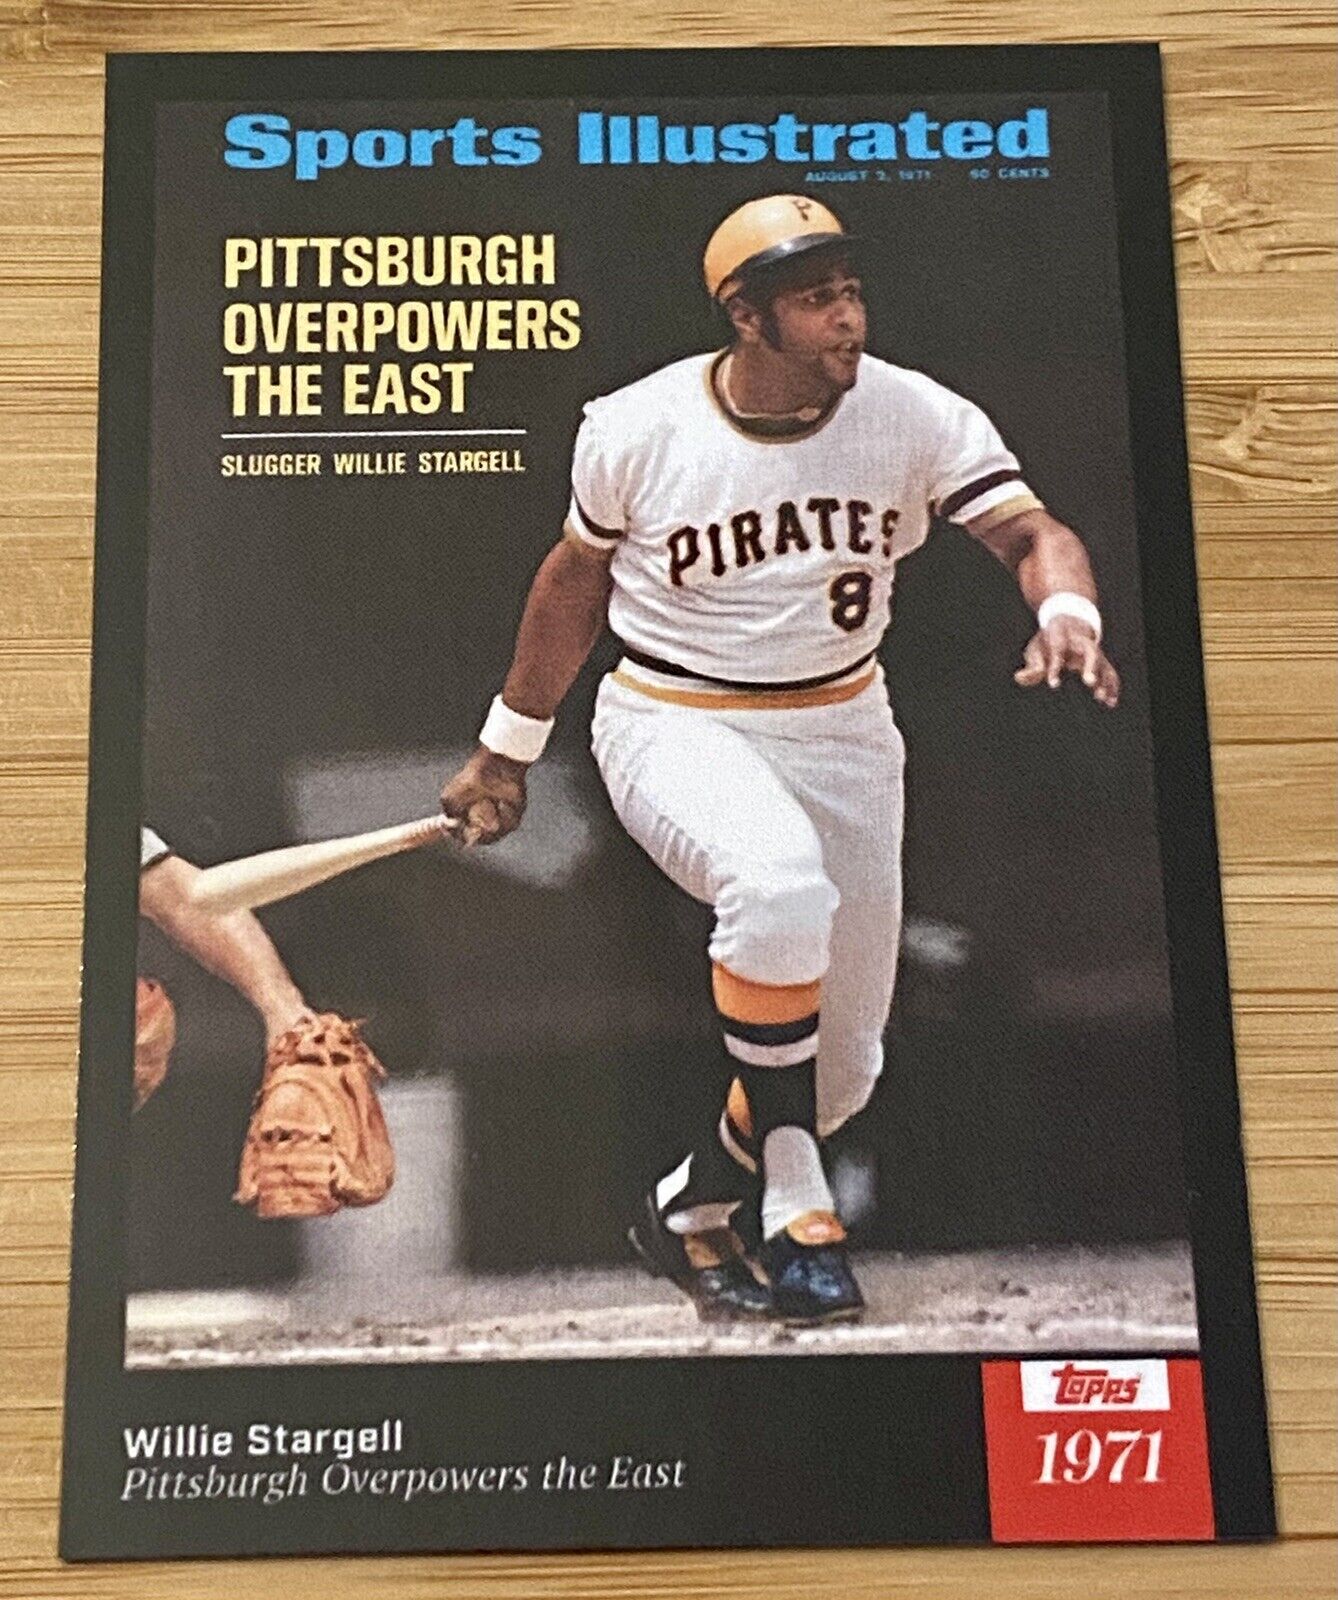 Willie Stargell, Pirates, 21 Topps Sports Illustrated Card #25, 8/2/1971 Issue